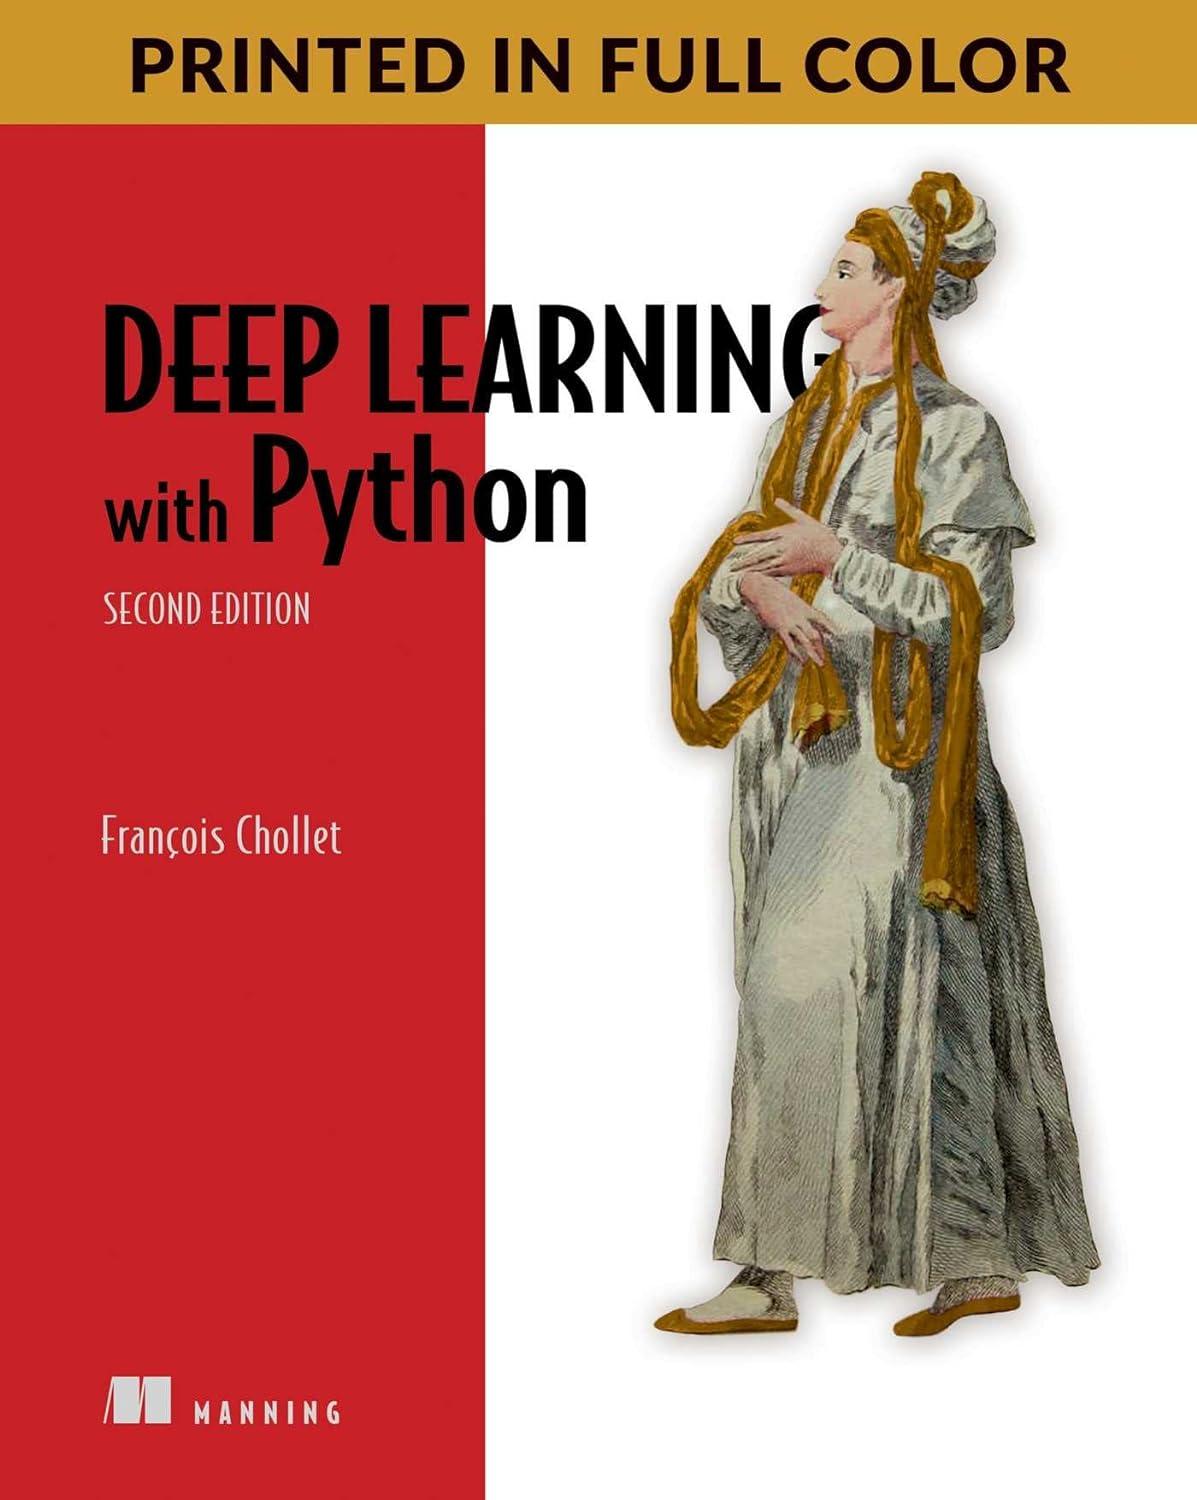 deep learning with python 2nd edition francois chollet 1617296864, 978-1617296864